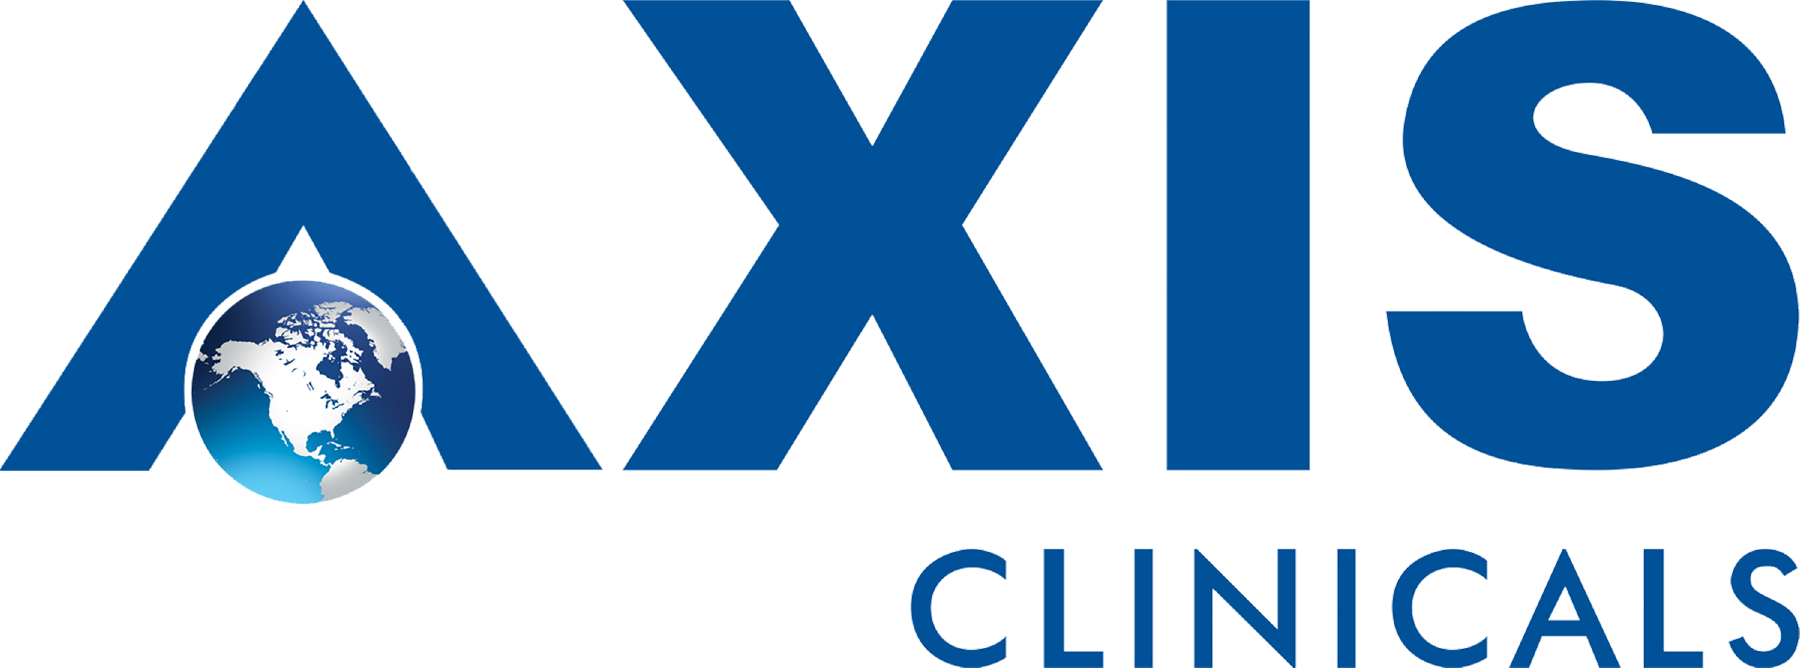 Blue Axis Clinicals Logo with world in the middle of the A